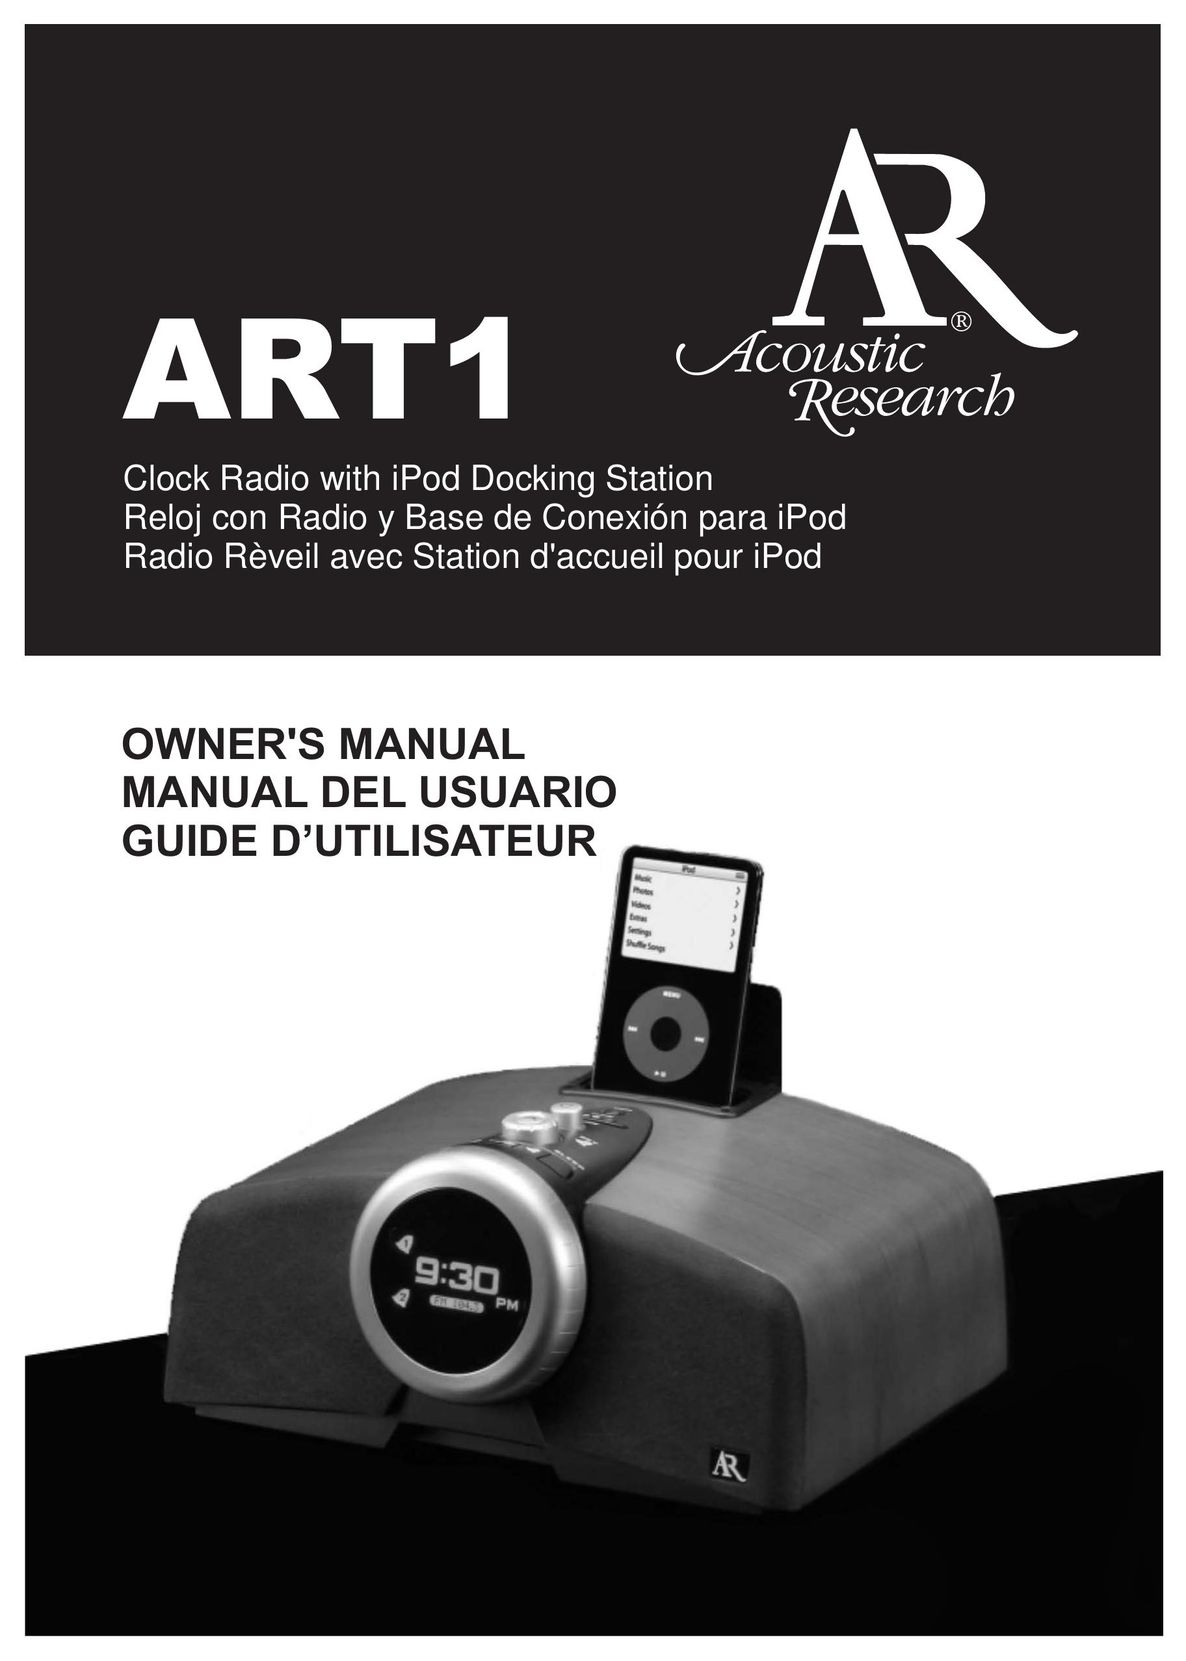 Acoustic Research ART1 Headphones User Manual (Page 1)